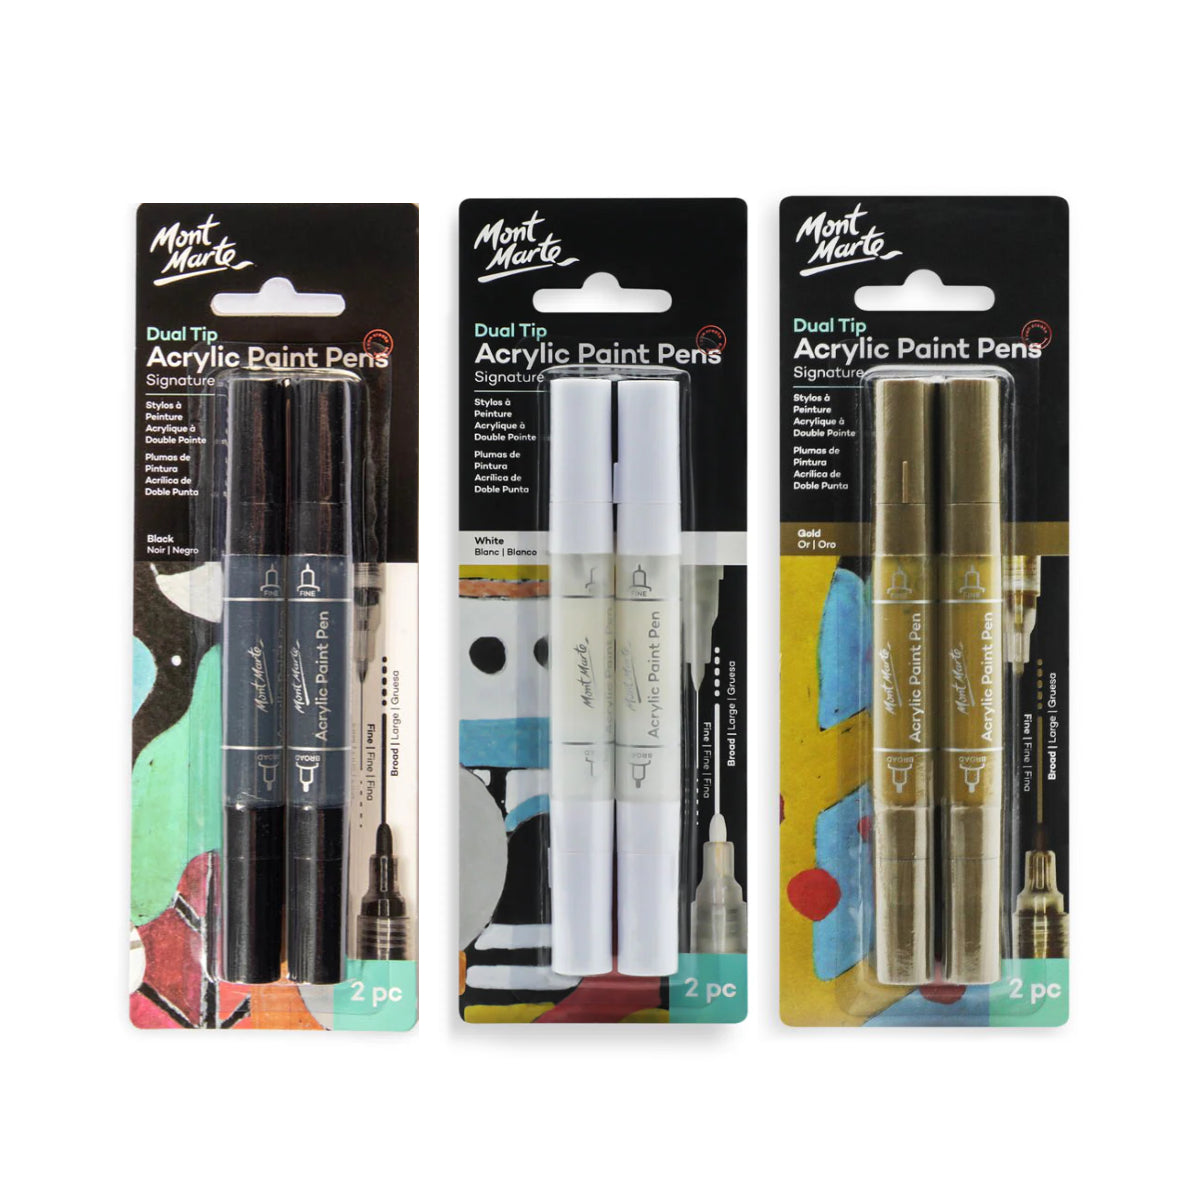 Acrylic paint pens for guest book posters set of 2 in black, white or gold